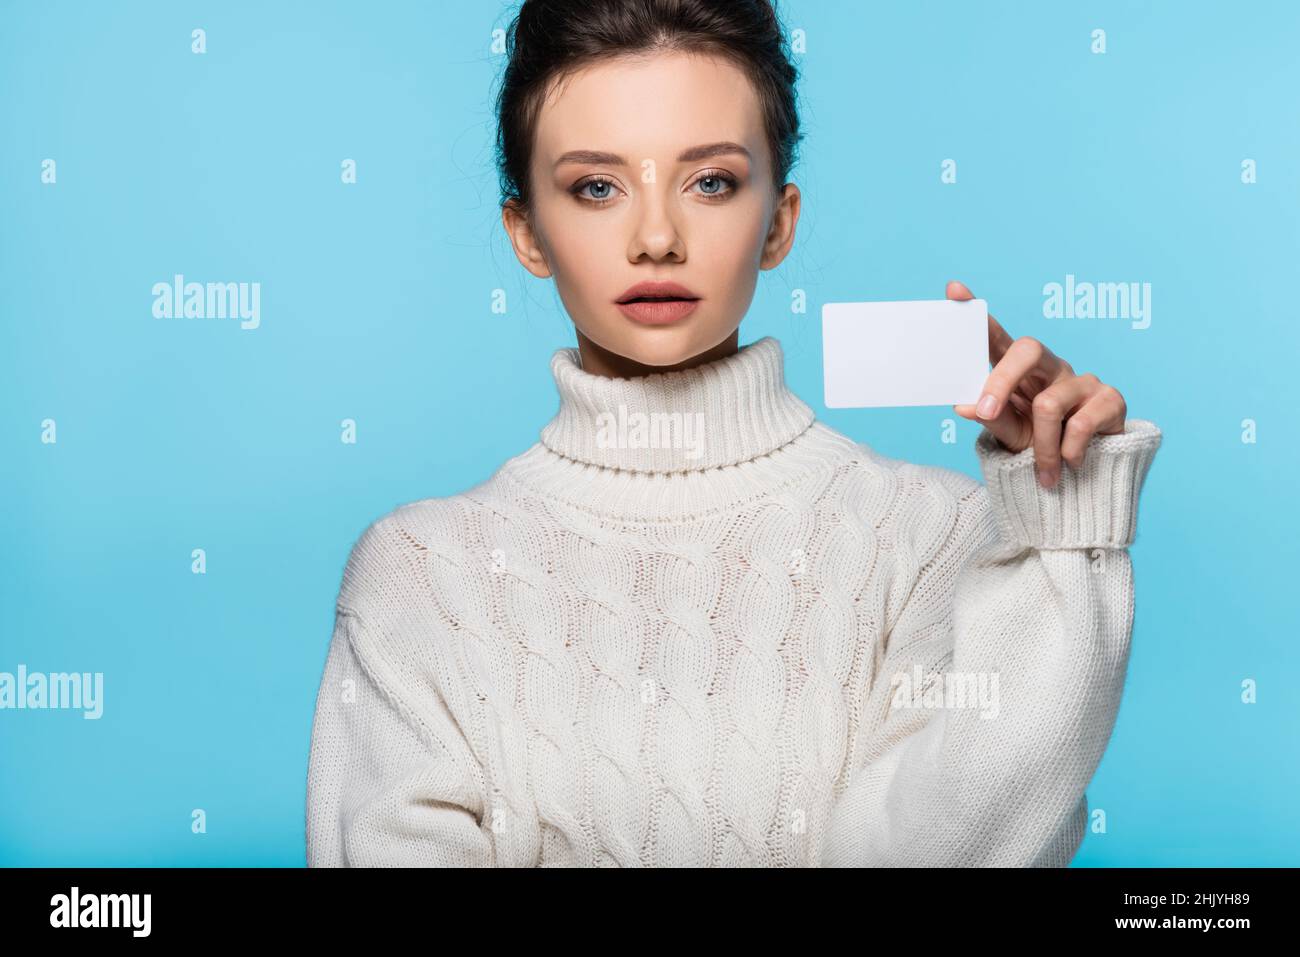 Young woman in knitted sweater holding blank card and looking at camera isolated on blue Stock Photo